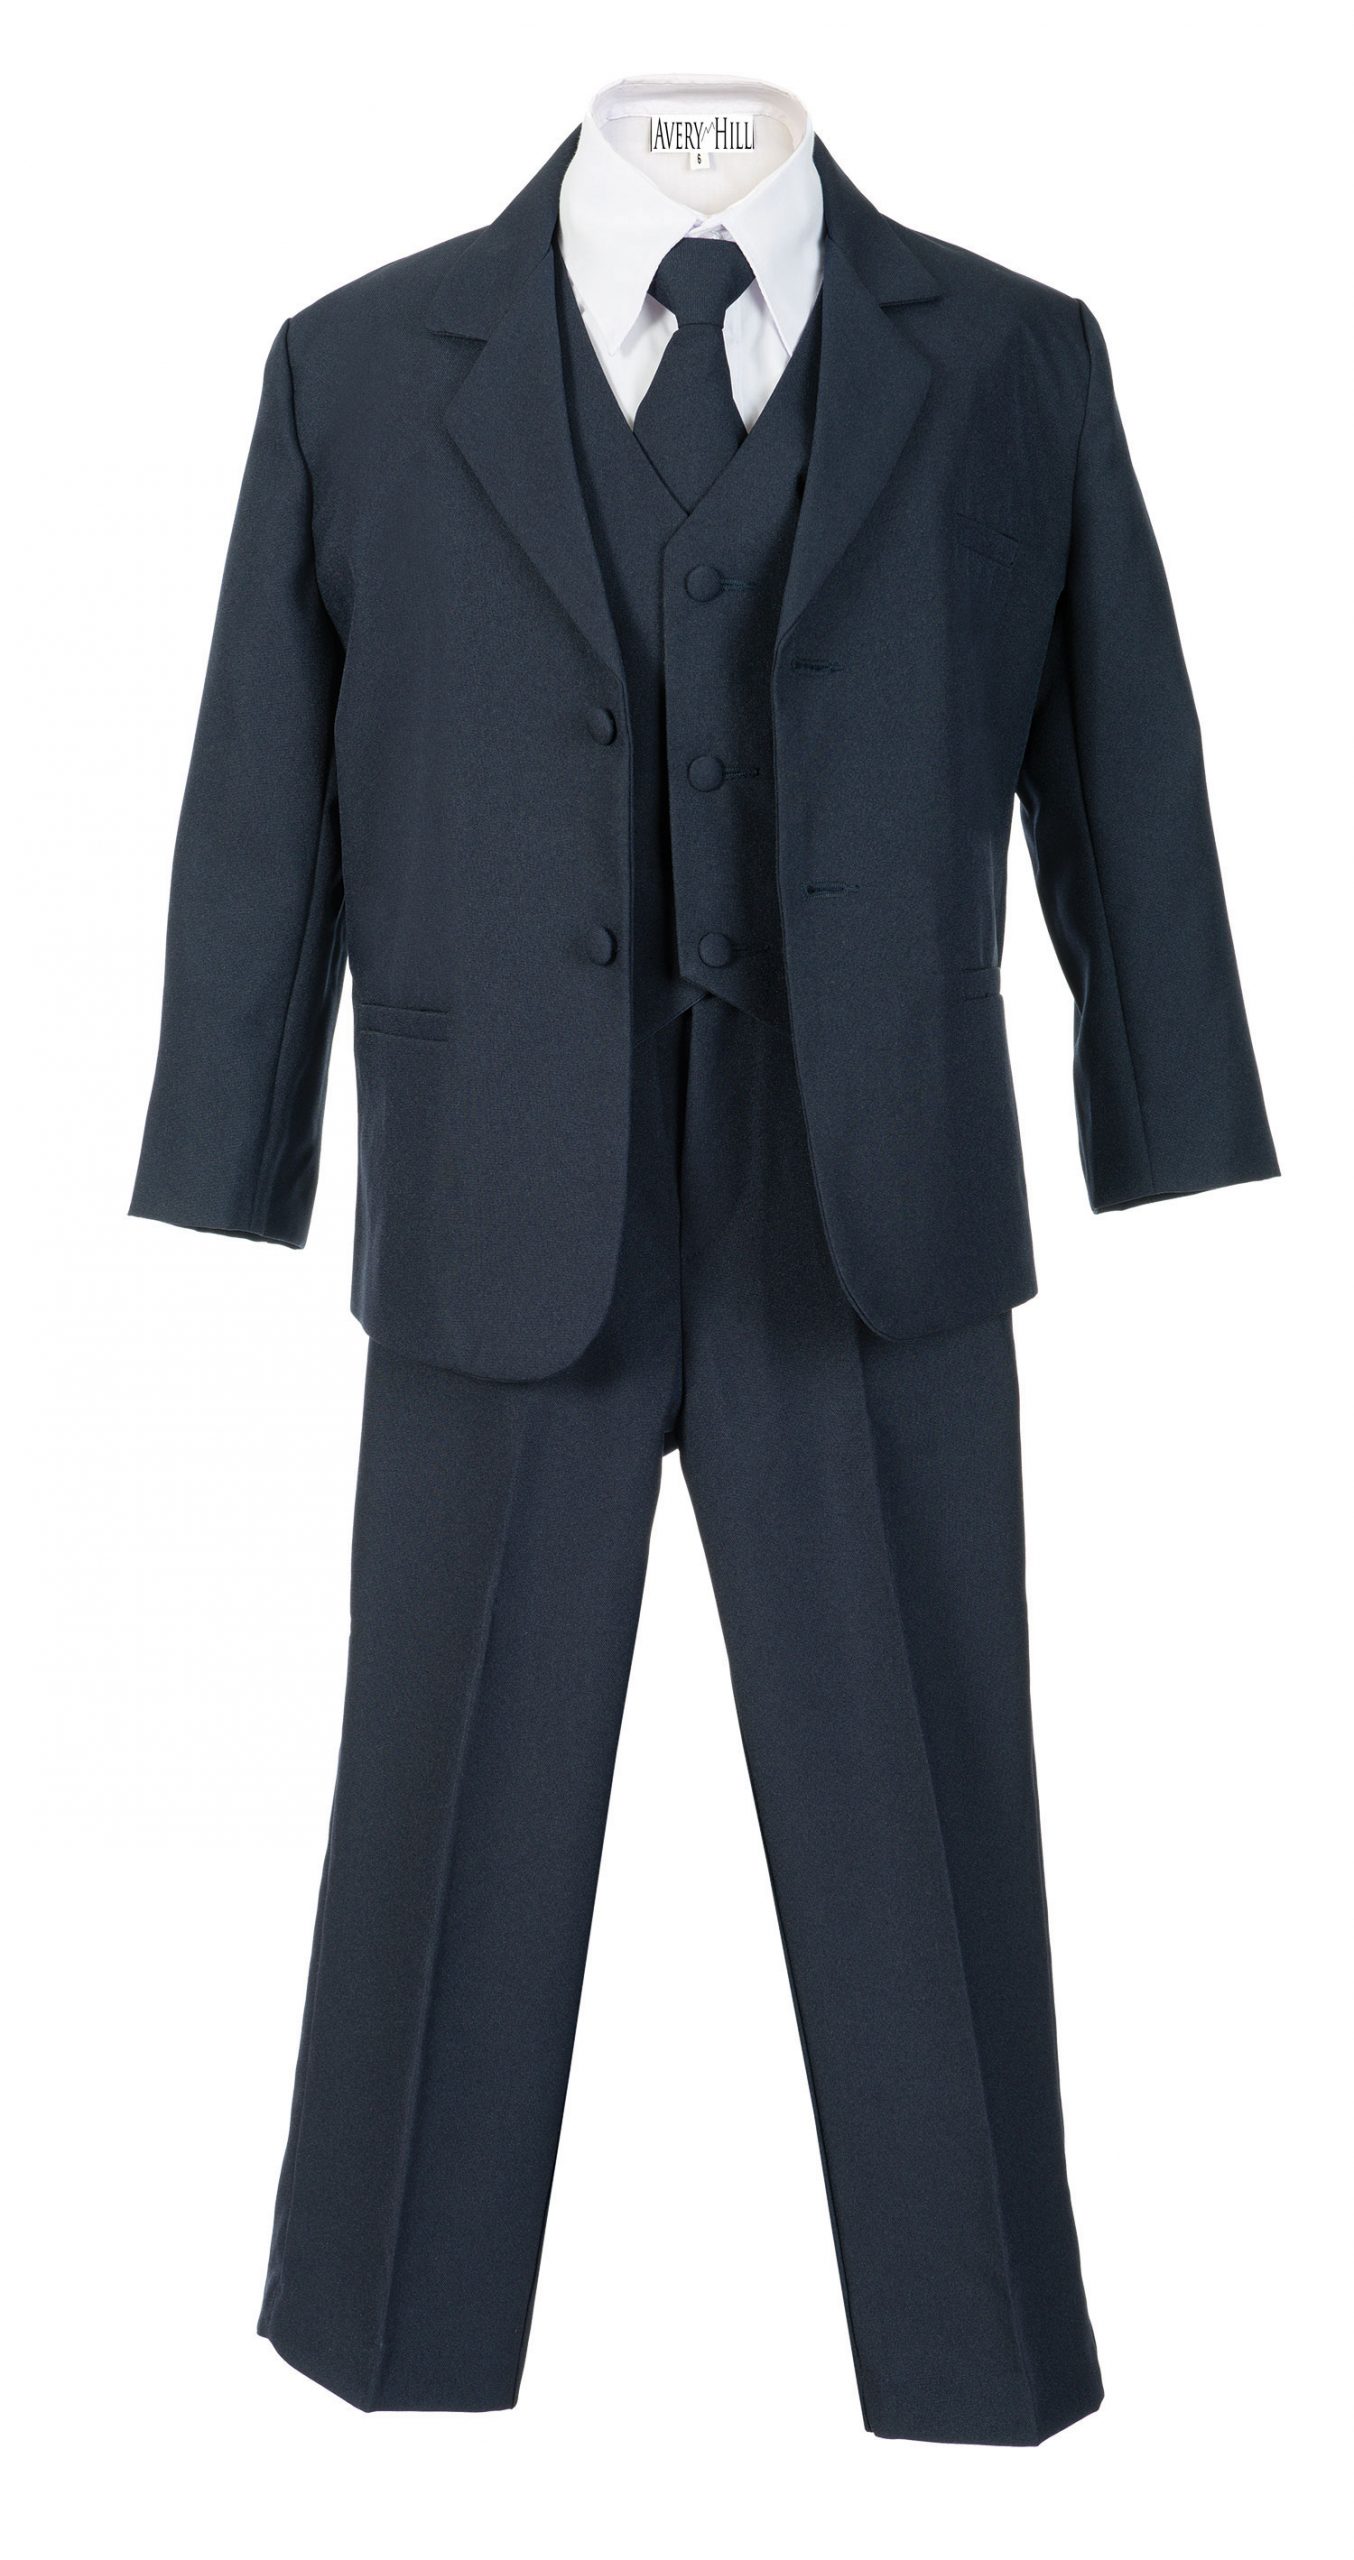 Avery Hill Boys Formal 5 Piece Suit with Shirt and Vest Navy - S